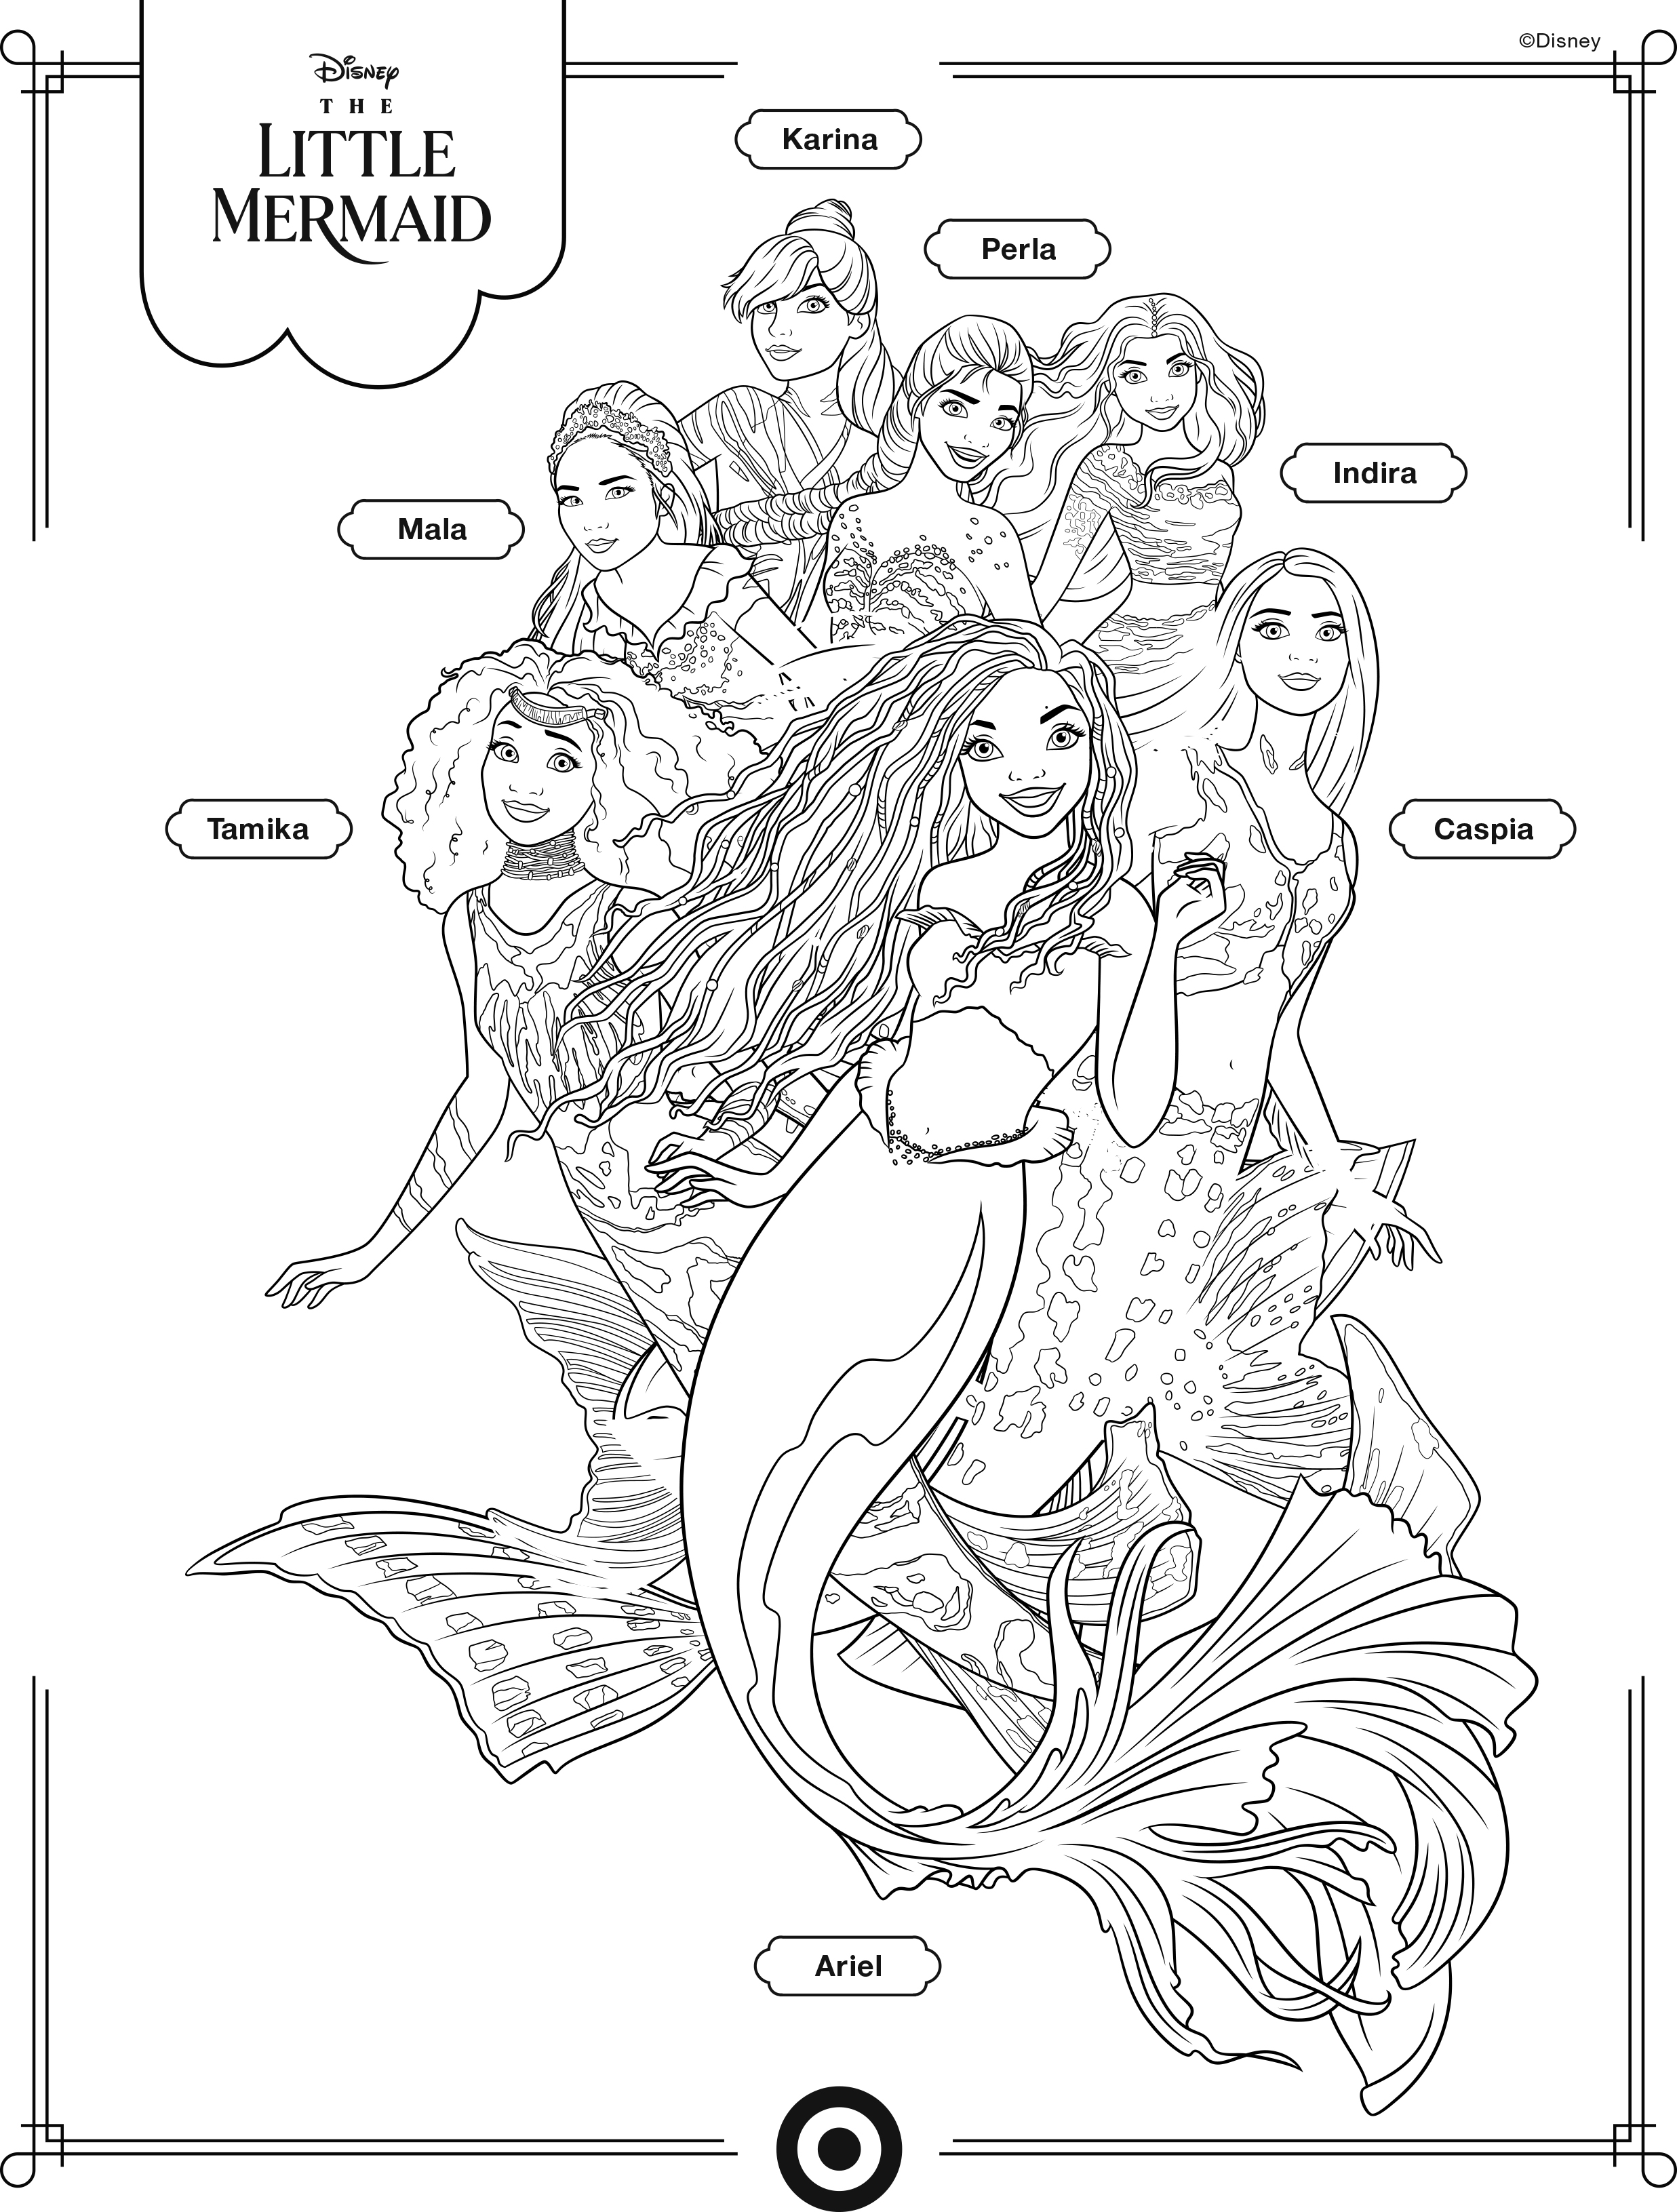 The Little Mermaid Coloring Sheet - Free Printable Templates